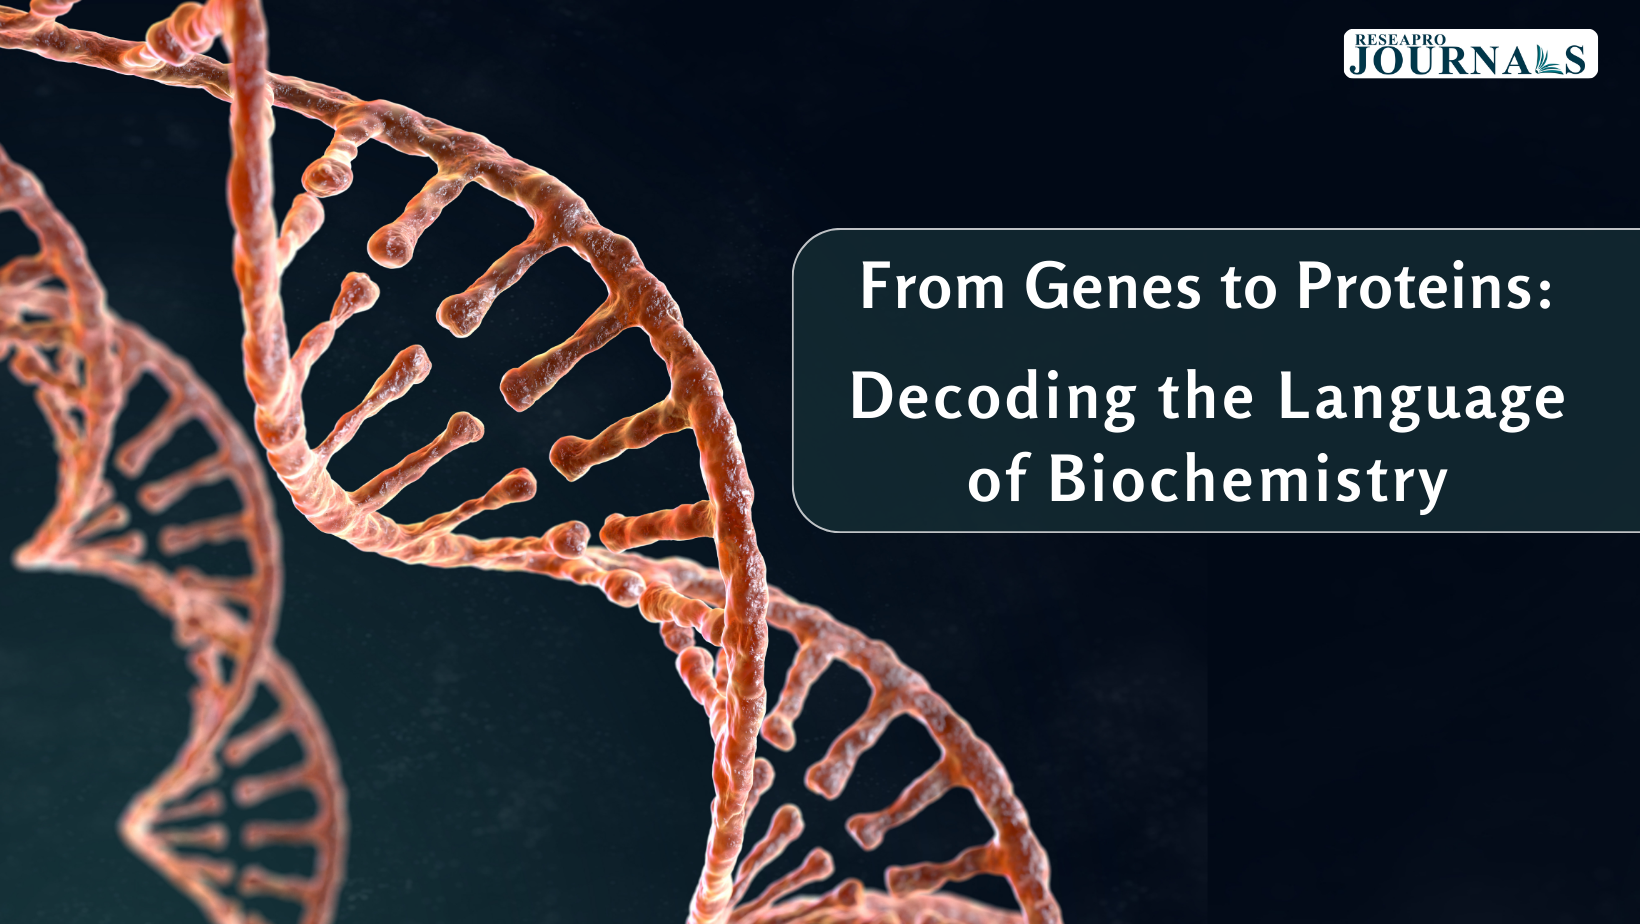 From Genes to Proteins: Decoding the Language of Biochemistry